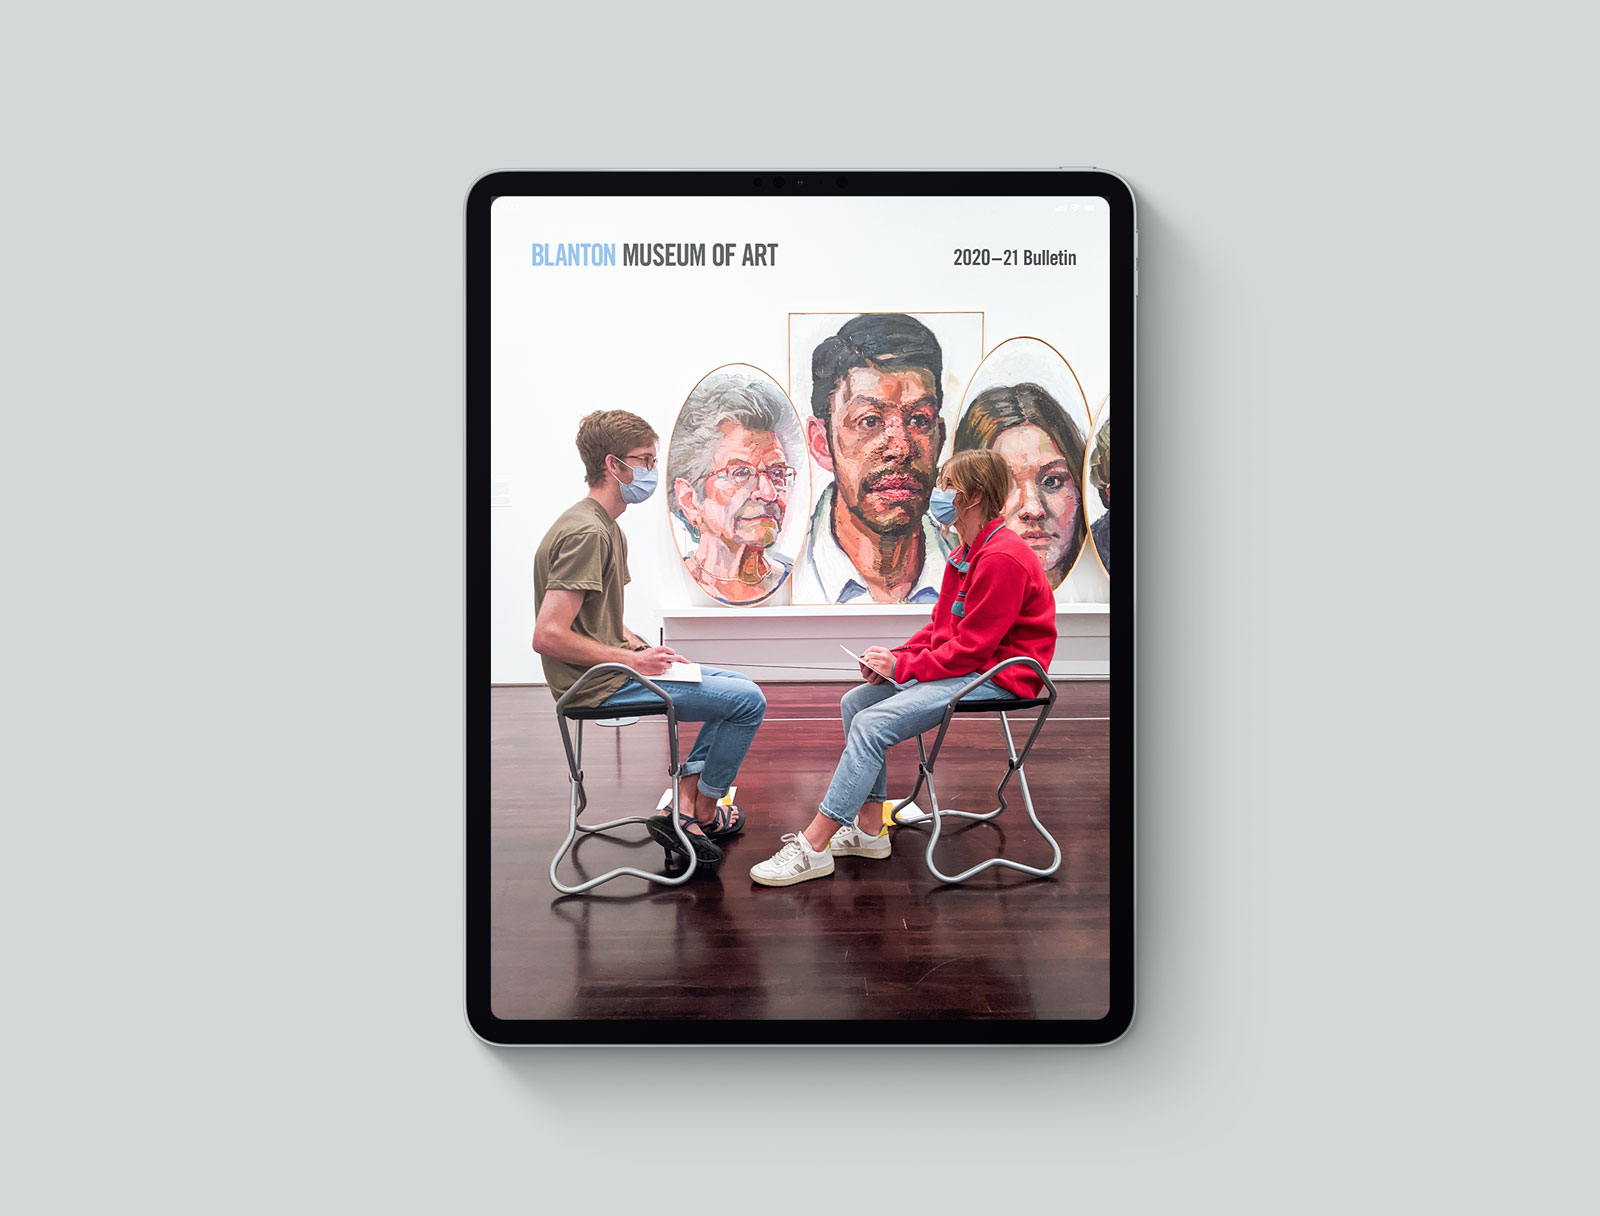 An iPad with an image of two people facing each other while sitting on stools in front of large portraits inside a gallery.